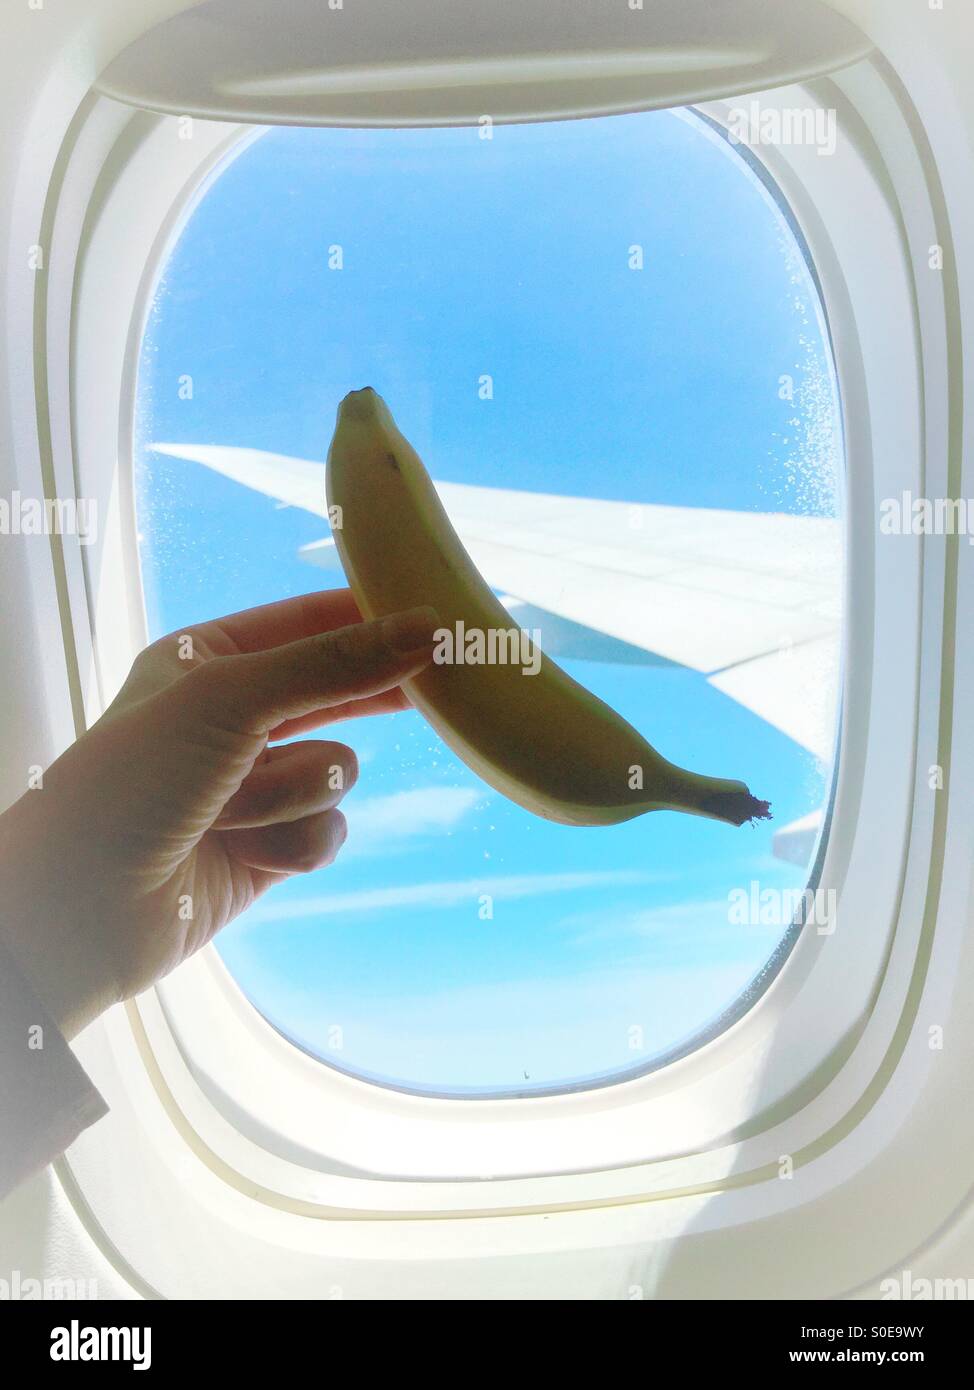 Banana in the sky. Airplane window with wing and blue sky in background and in foreground hand holding banana served as part of in-flight breakfast. Stock Photo